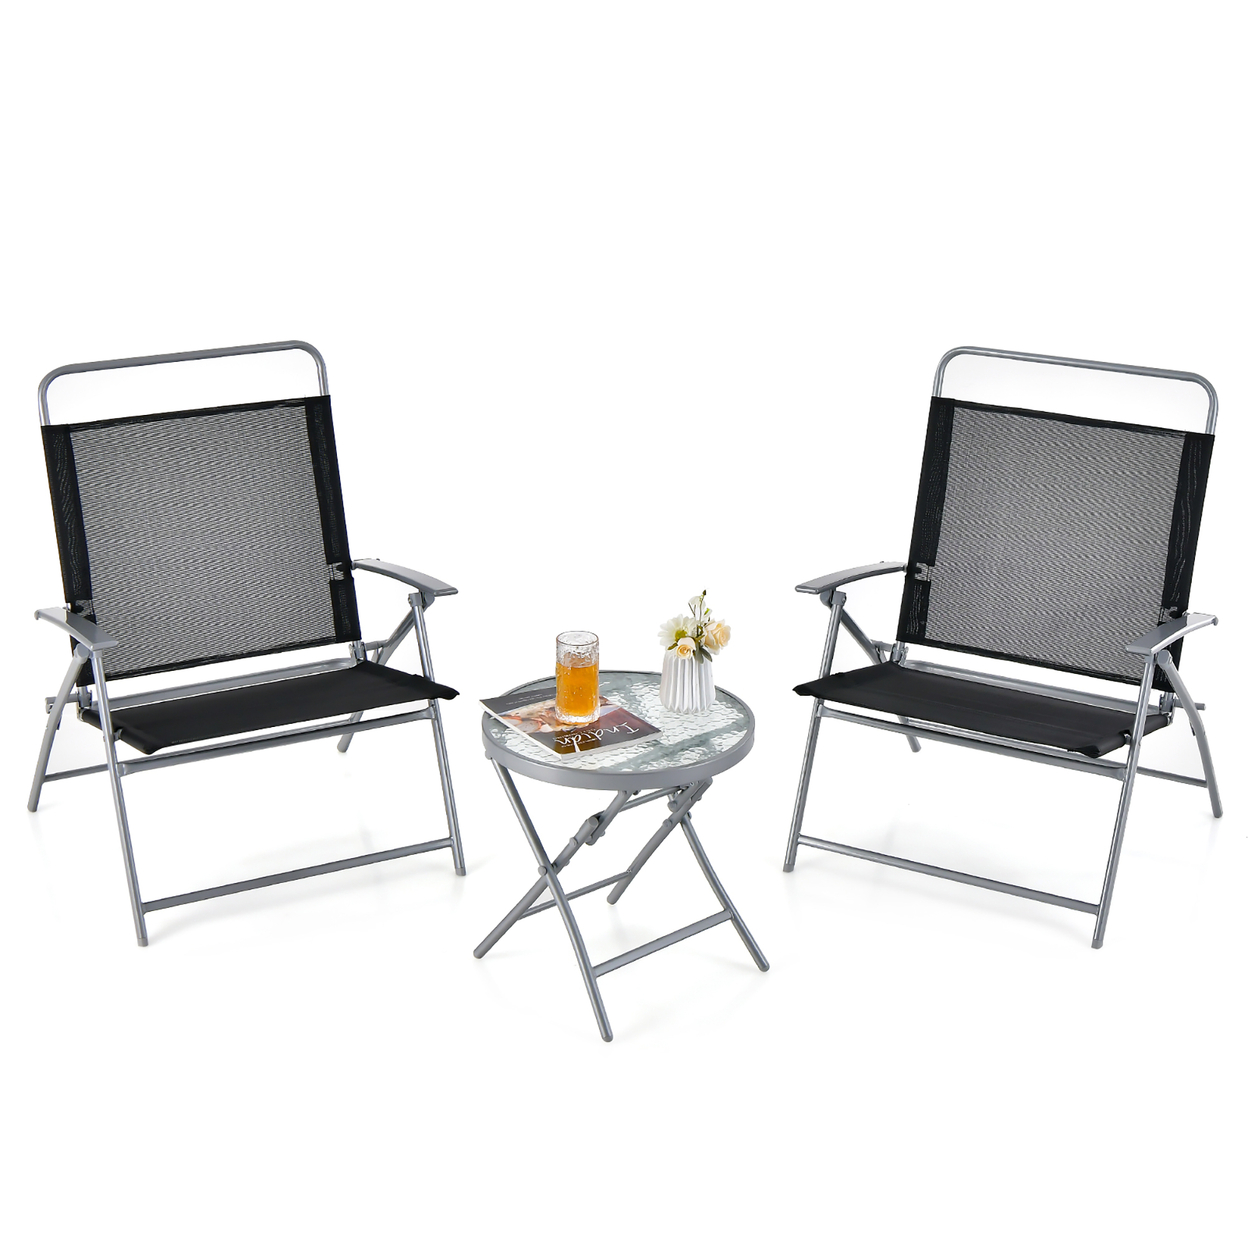 3 Piece Patio Folding Chair Set W/ Coffee Table & Extra-Large Seat Porch Backyard Poolside